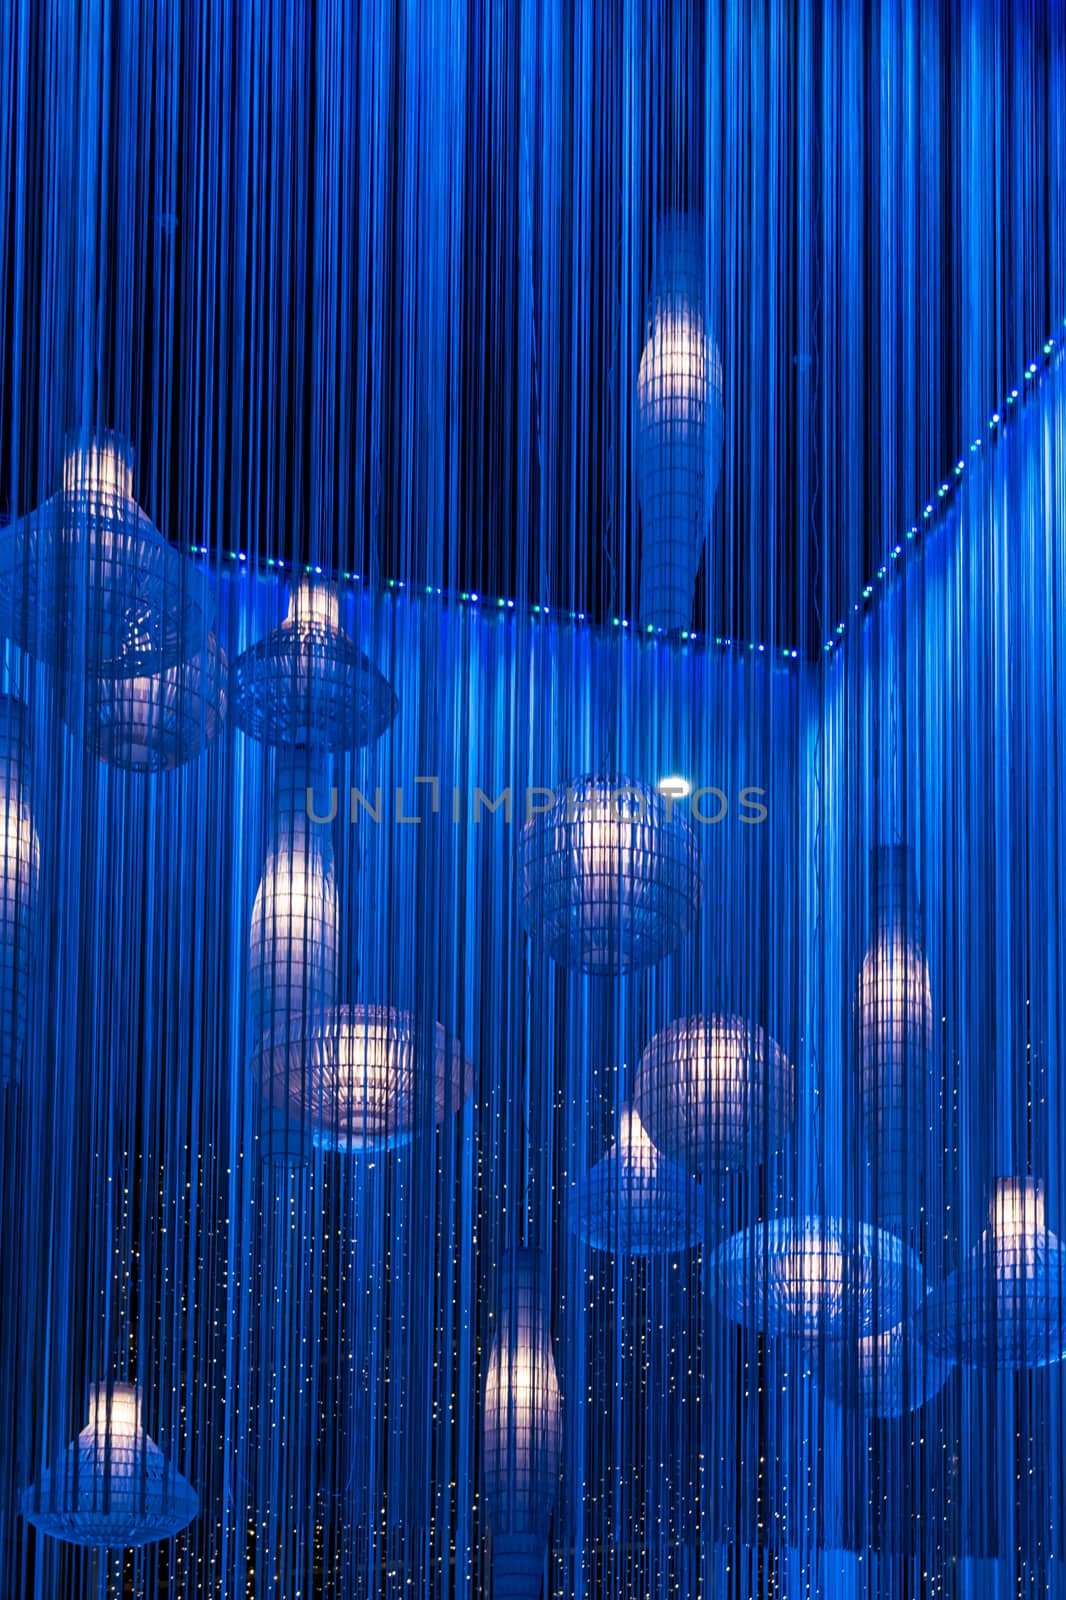 Abstract blue light installation with lamps and fabric stripes by MXW_Stock